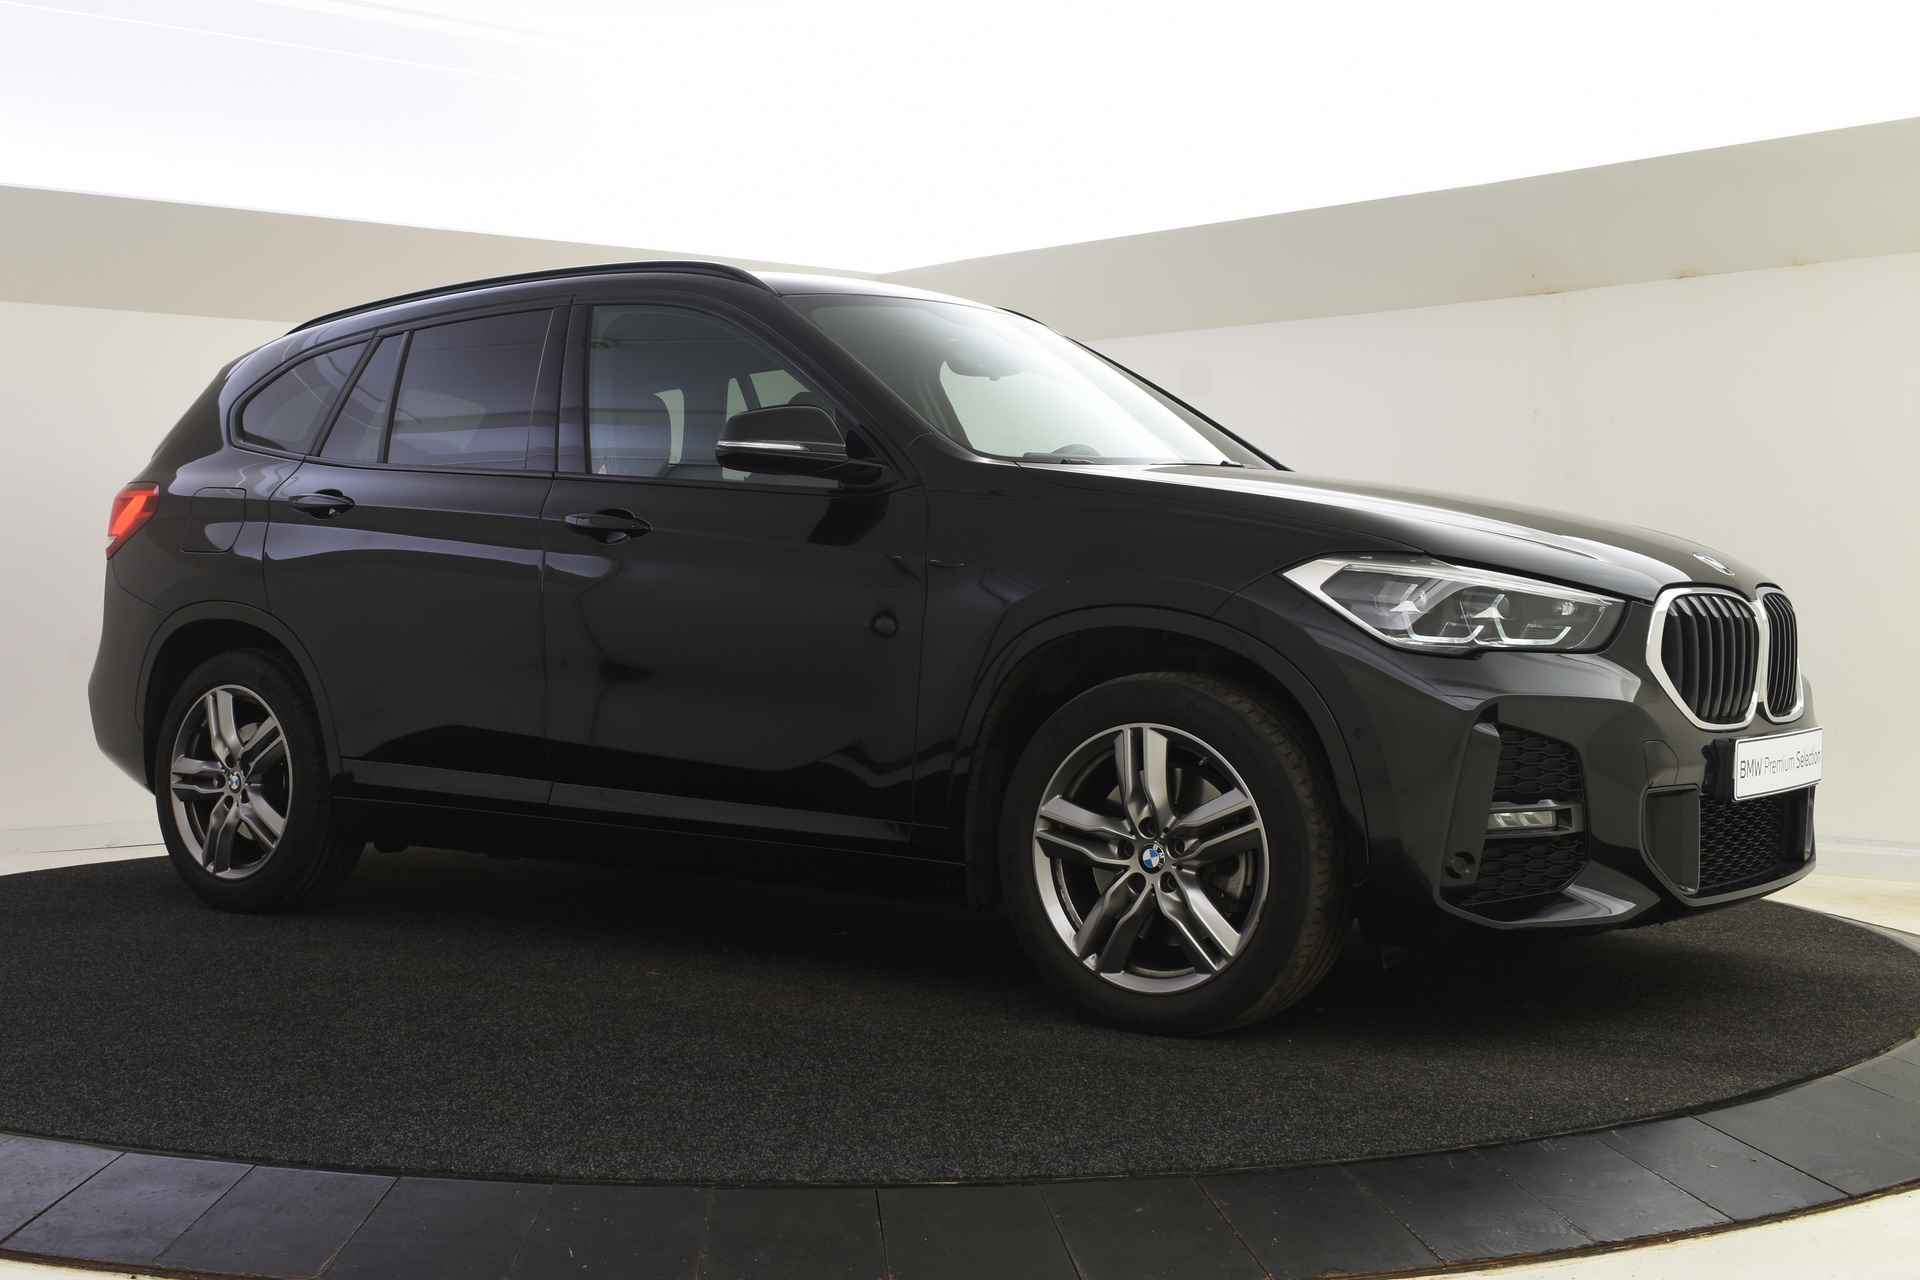 BMW X1 sDrive20i Executive M Sport Automaat / Sportstoelen / Adaptieve LED / Active Cruise Control / Achteruitrijcamera / Head-Up / Park Assistant / Driving Assistant Plus - 8/47